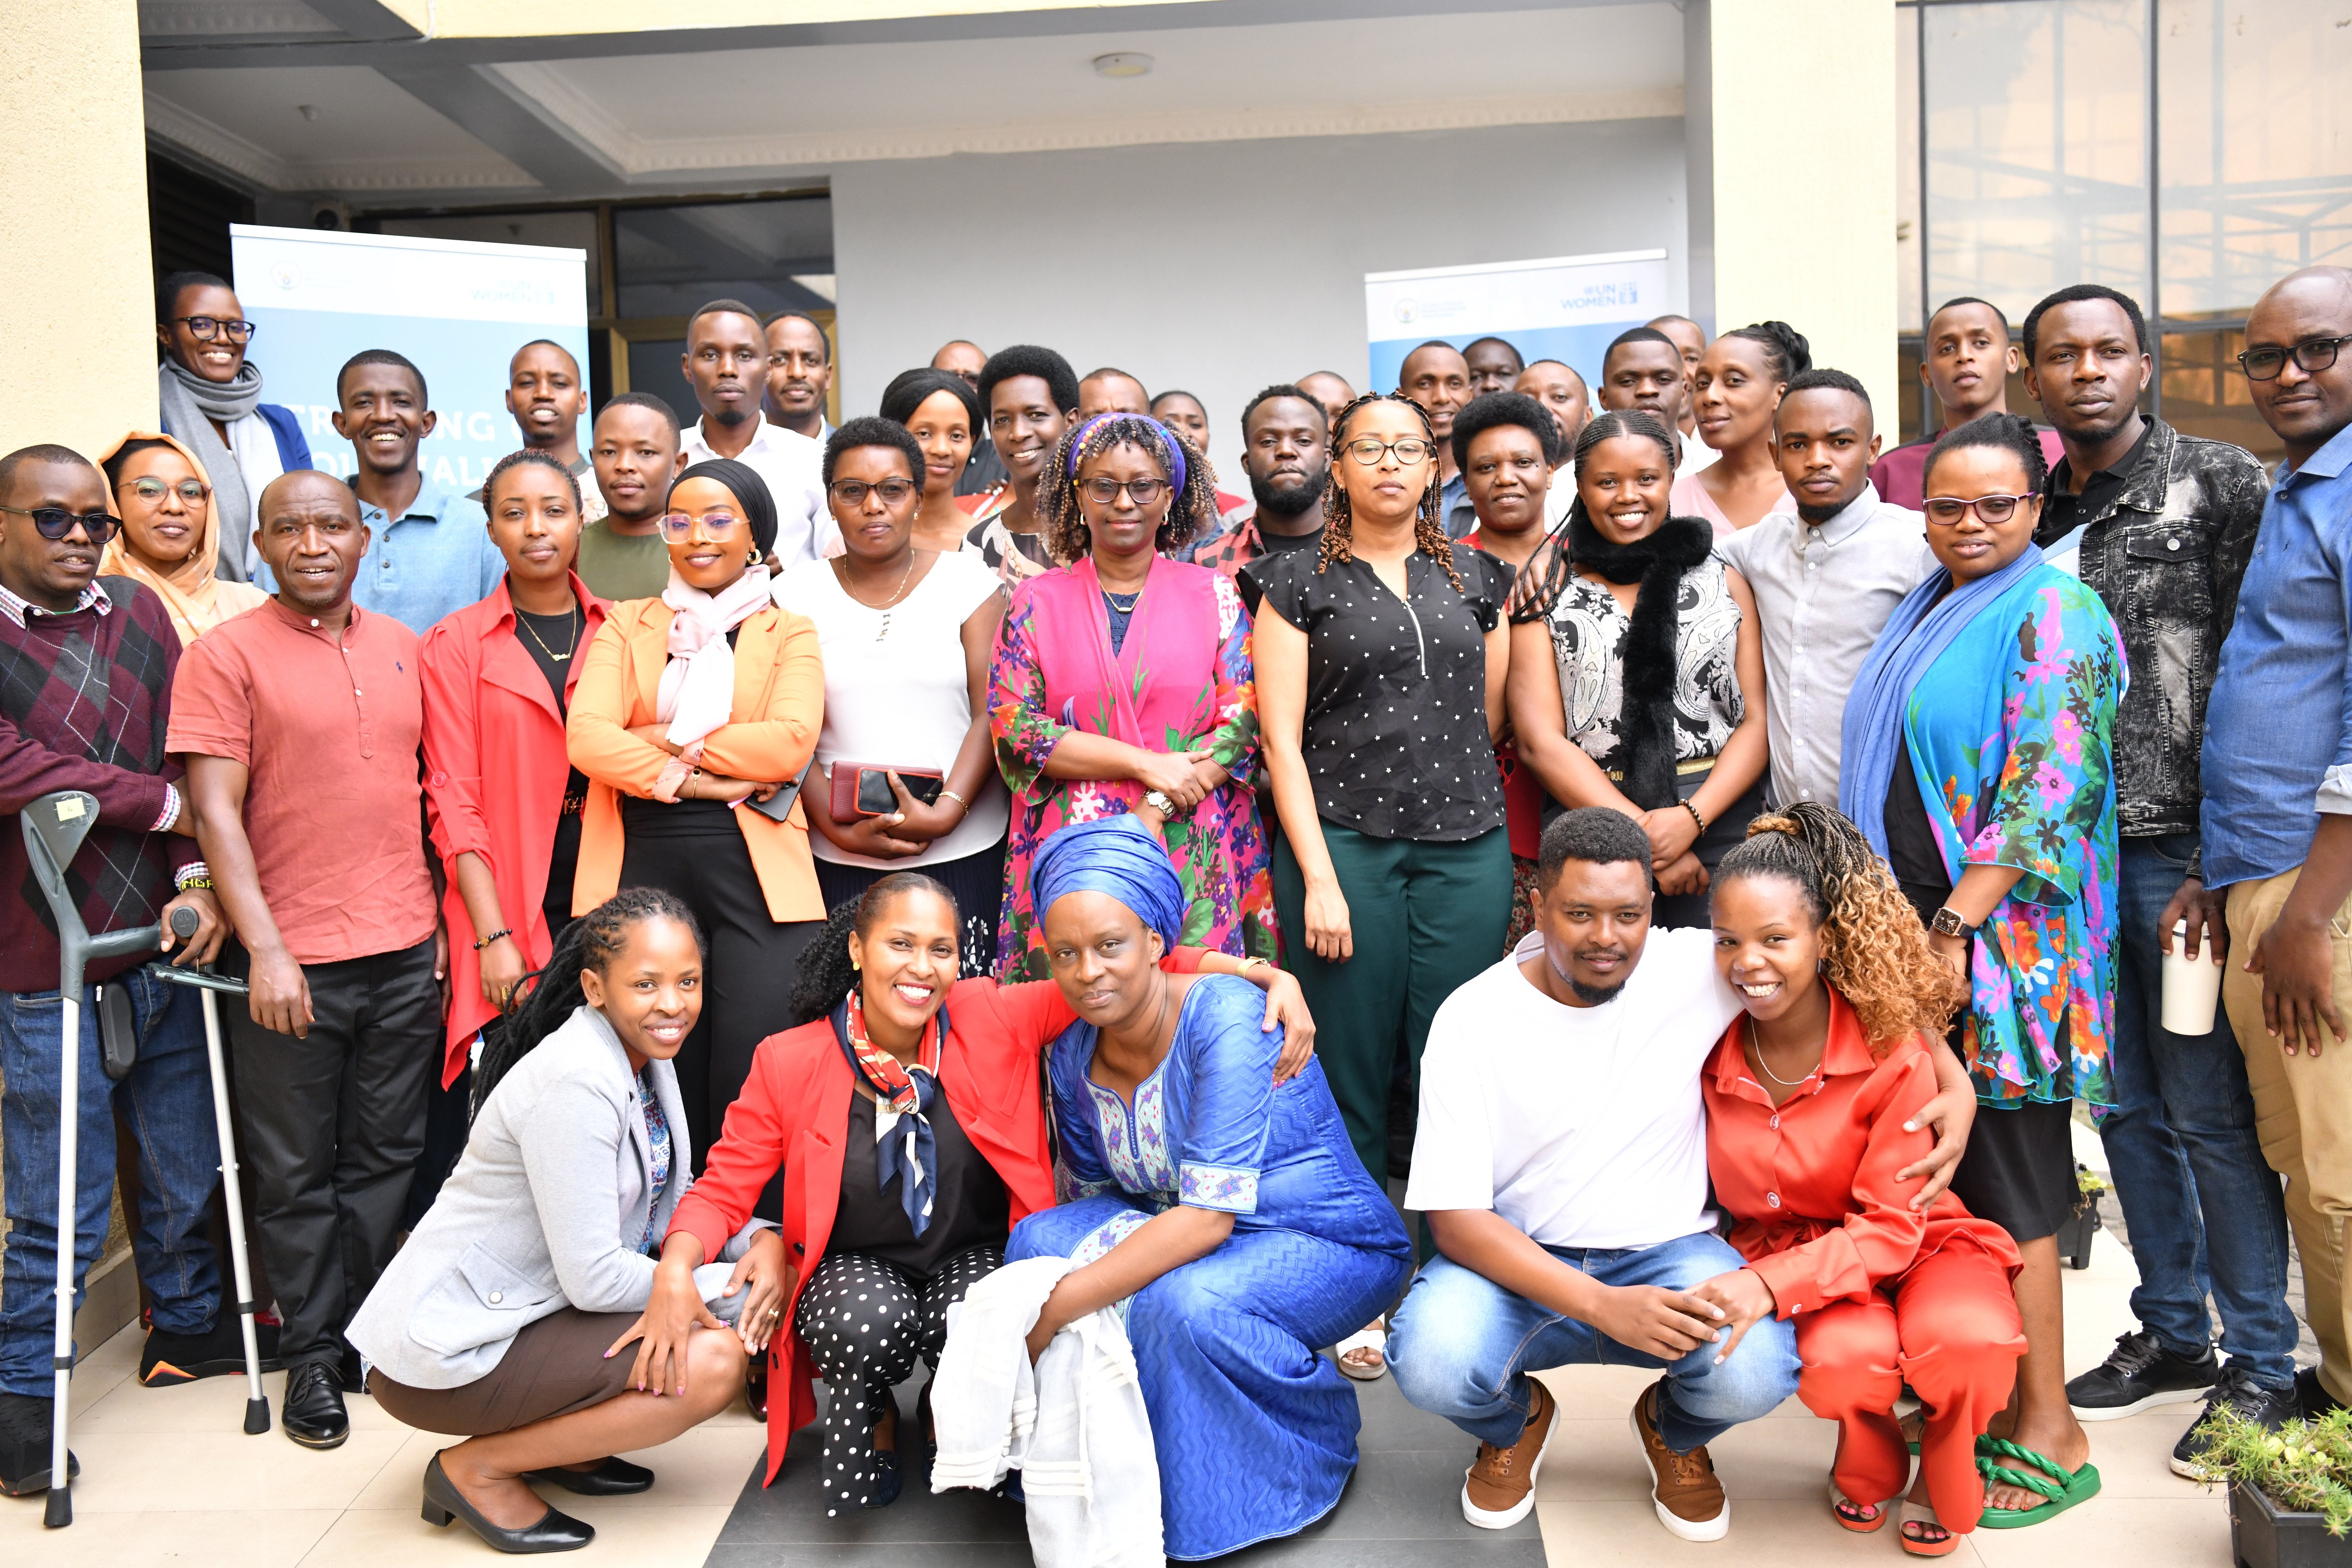 Participants of the three-day training including chief editors, journalists, social media influencers, as well as government counterparts and UN Women staff.